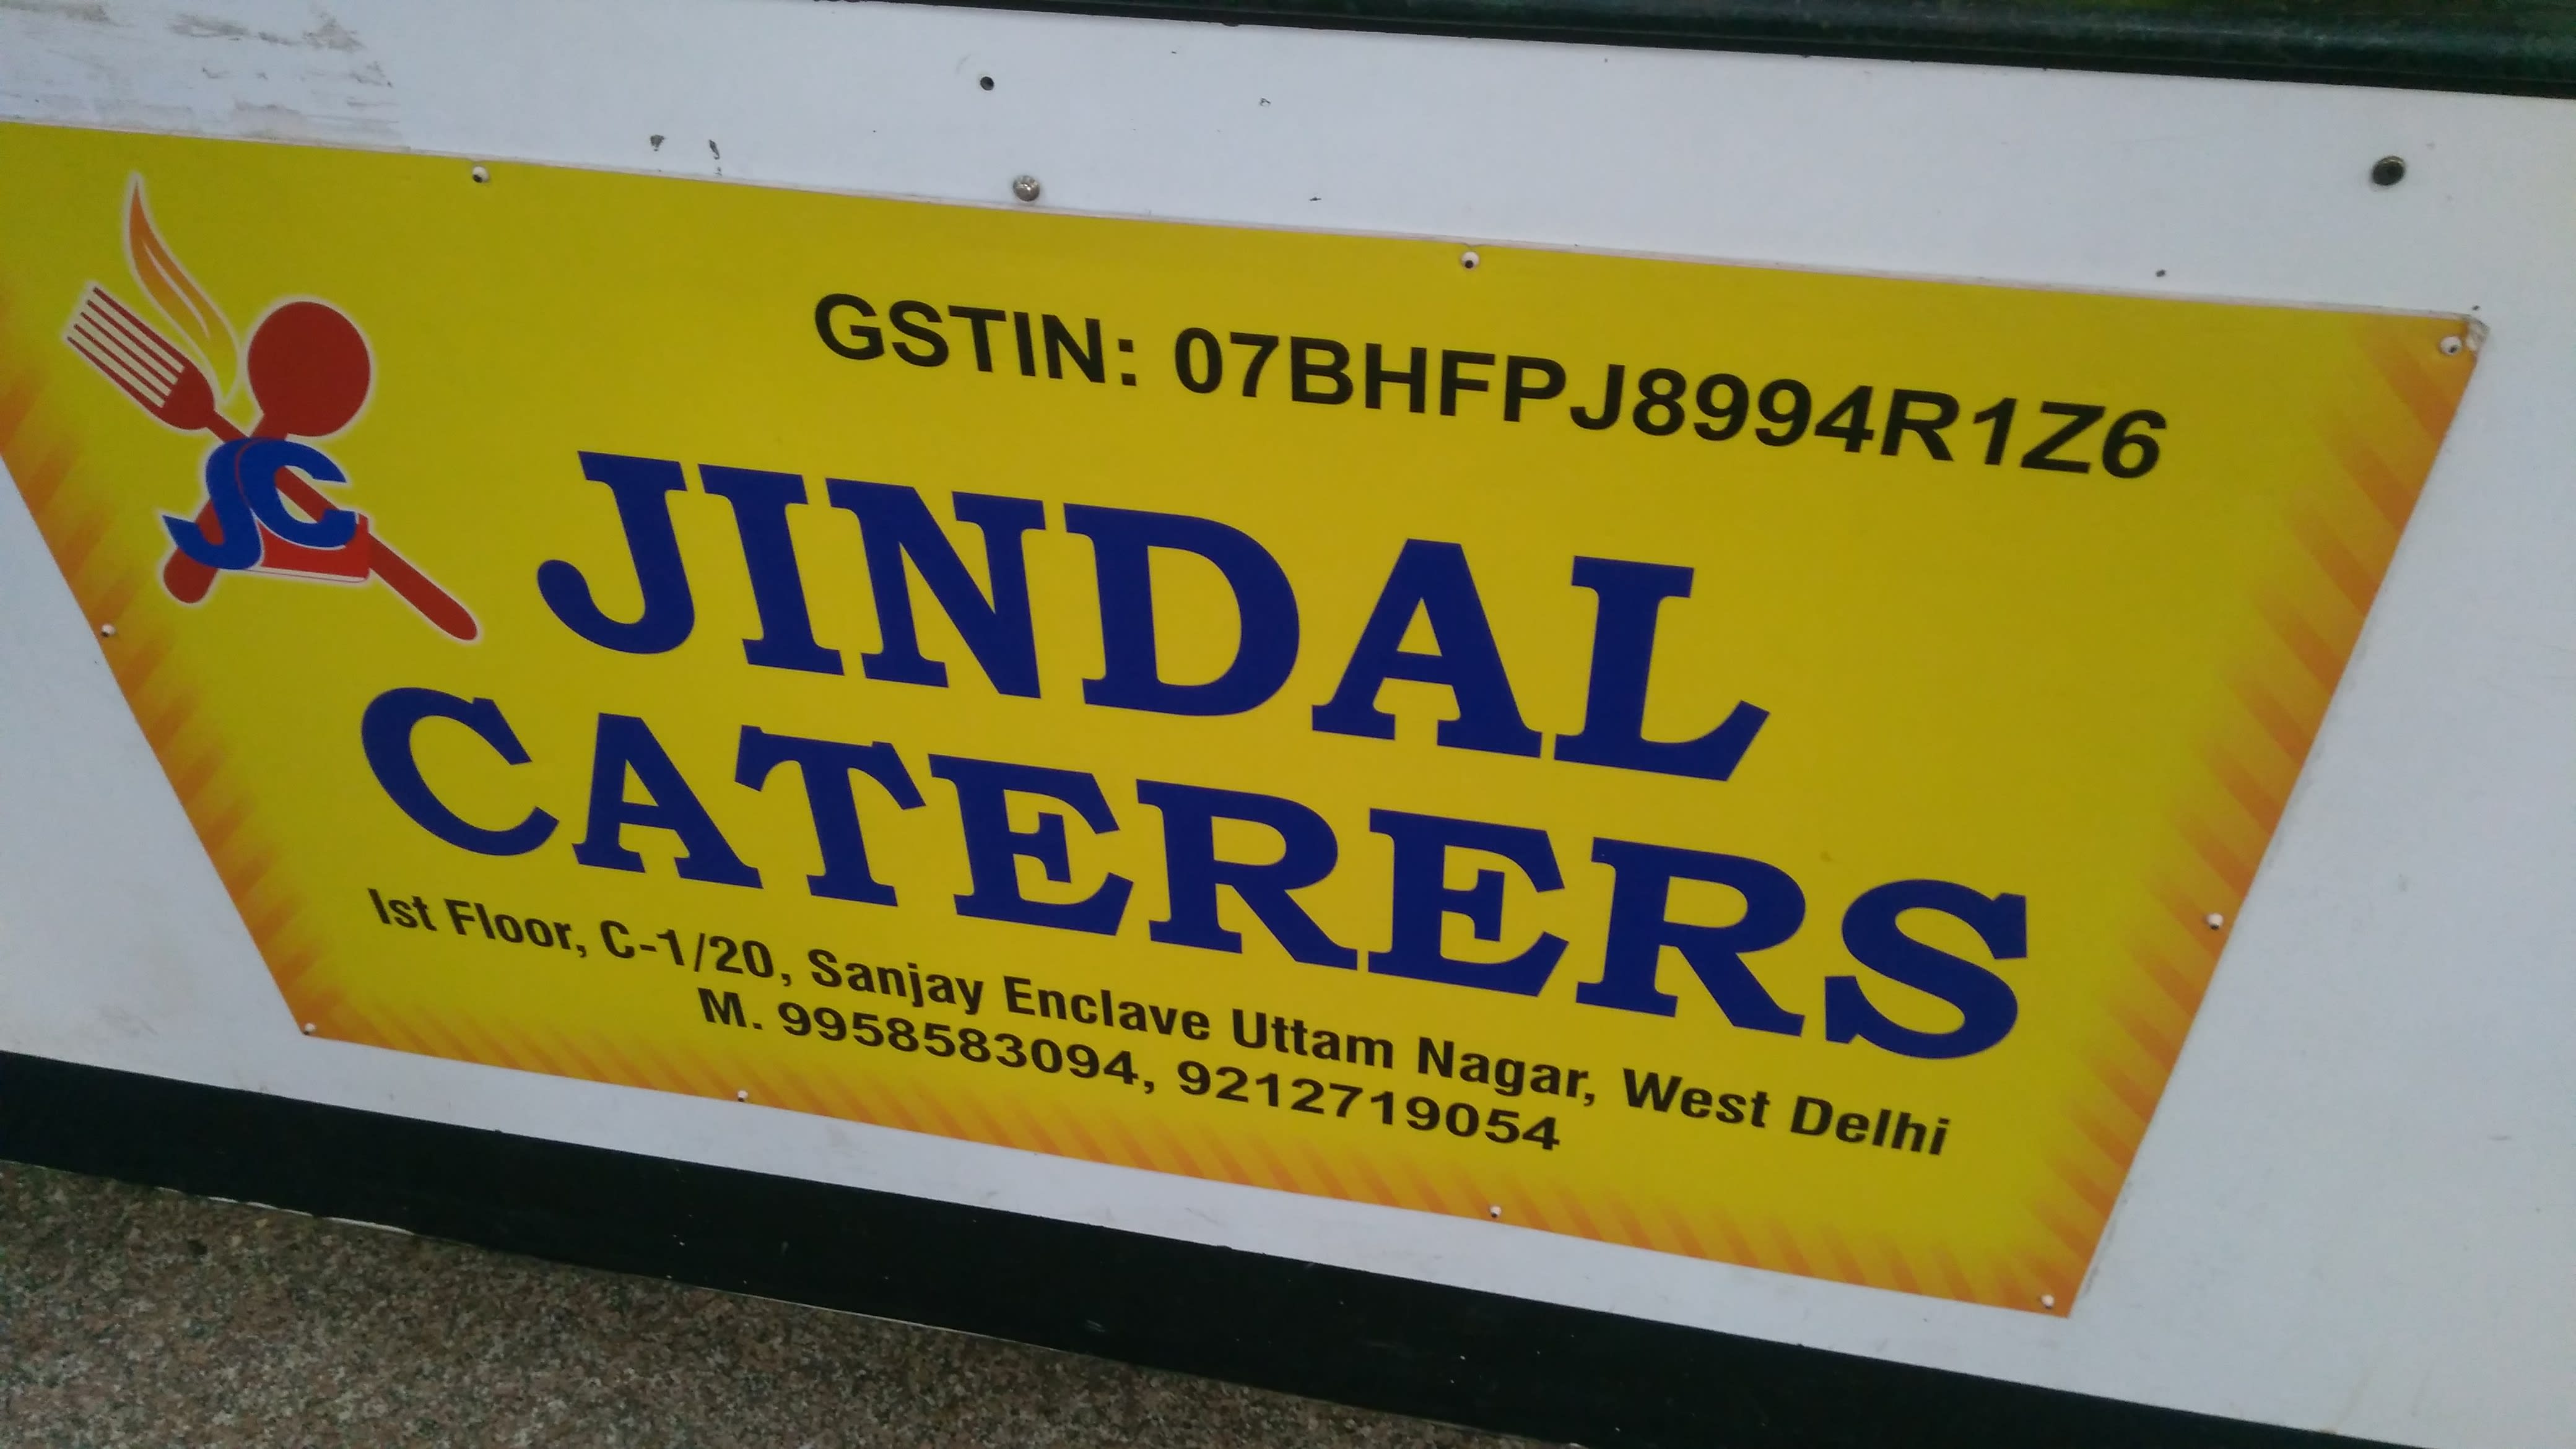 Jindal Caterers